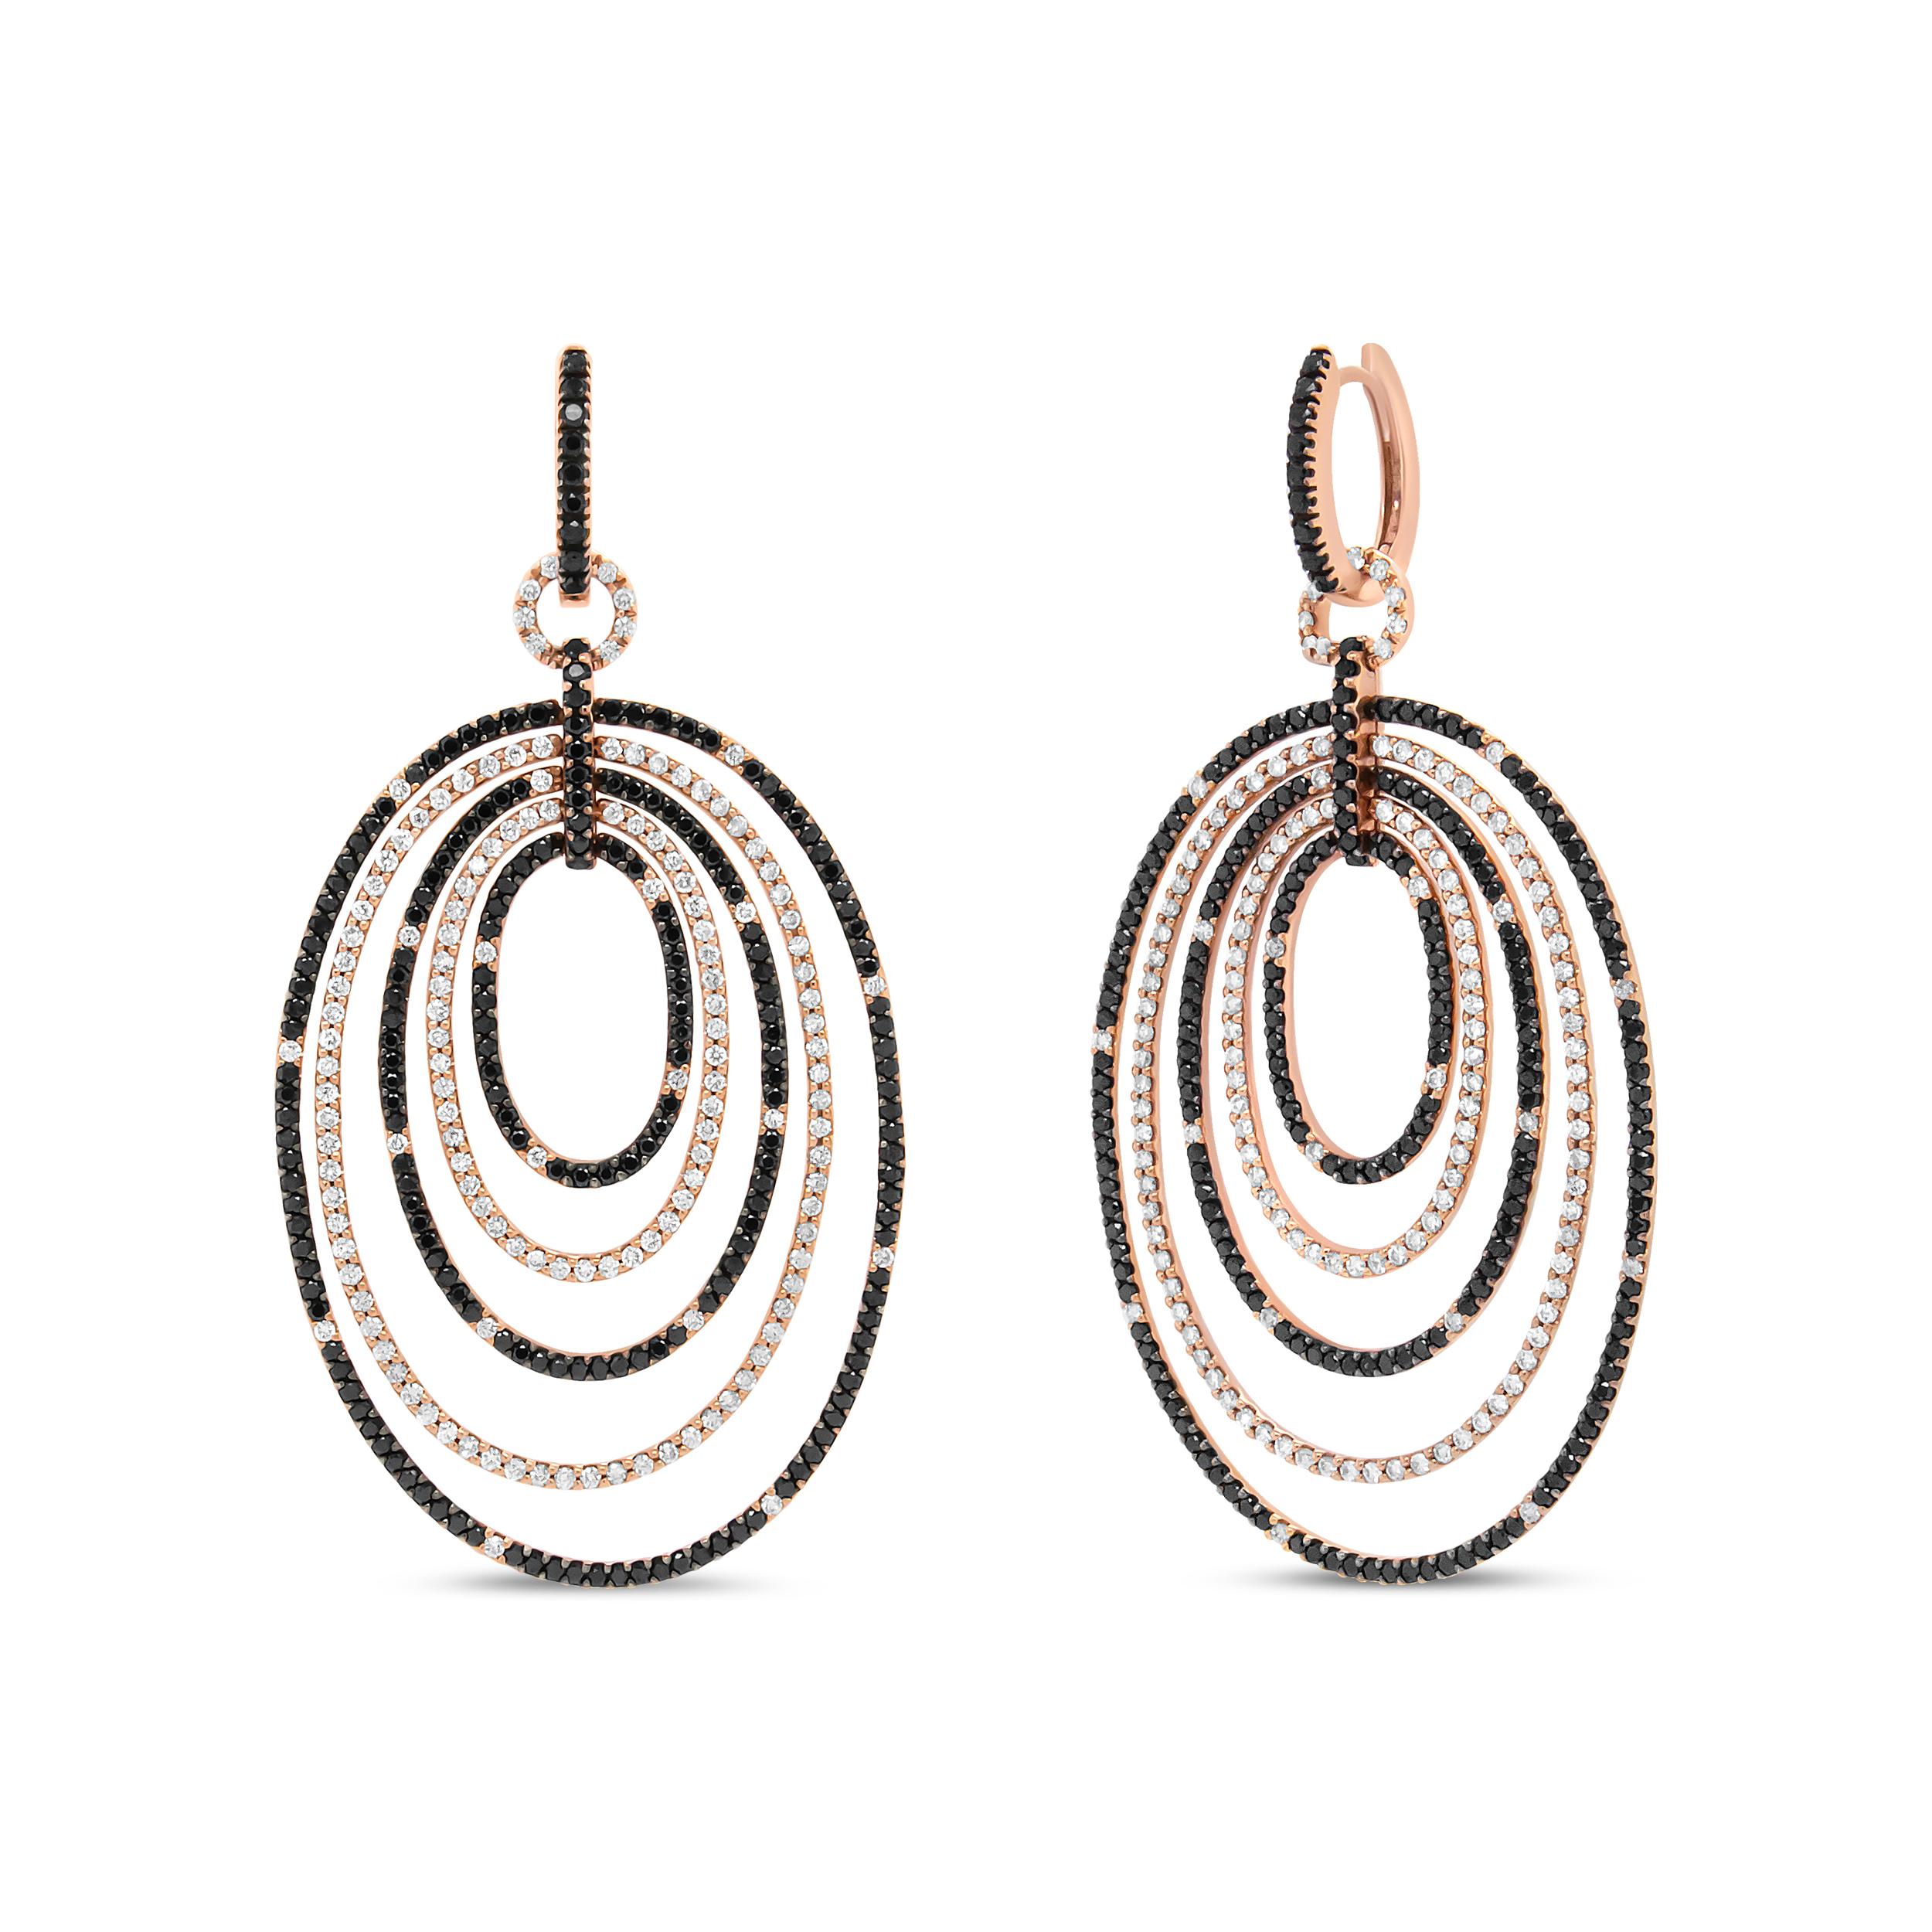 The fearless and bold design of these 18k rose gold earrings make it the eye-catcher it is. Heightened with the allure of 710 round, prong-set diamonds, this pair is nothing short of dazzling! A total of 5 hoops in graduated sizes features an